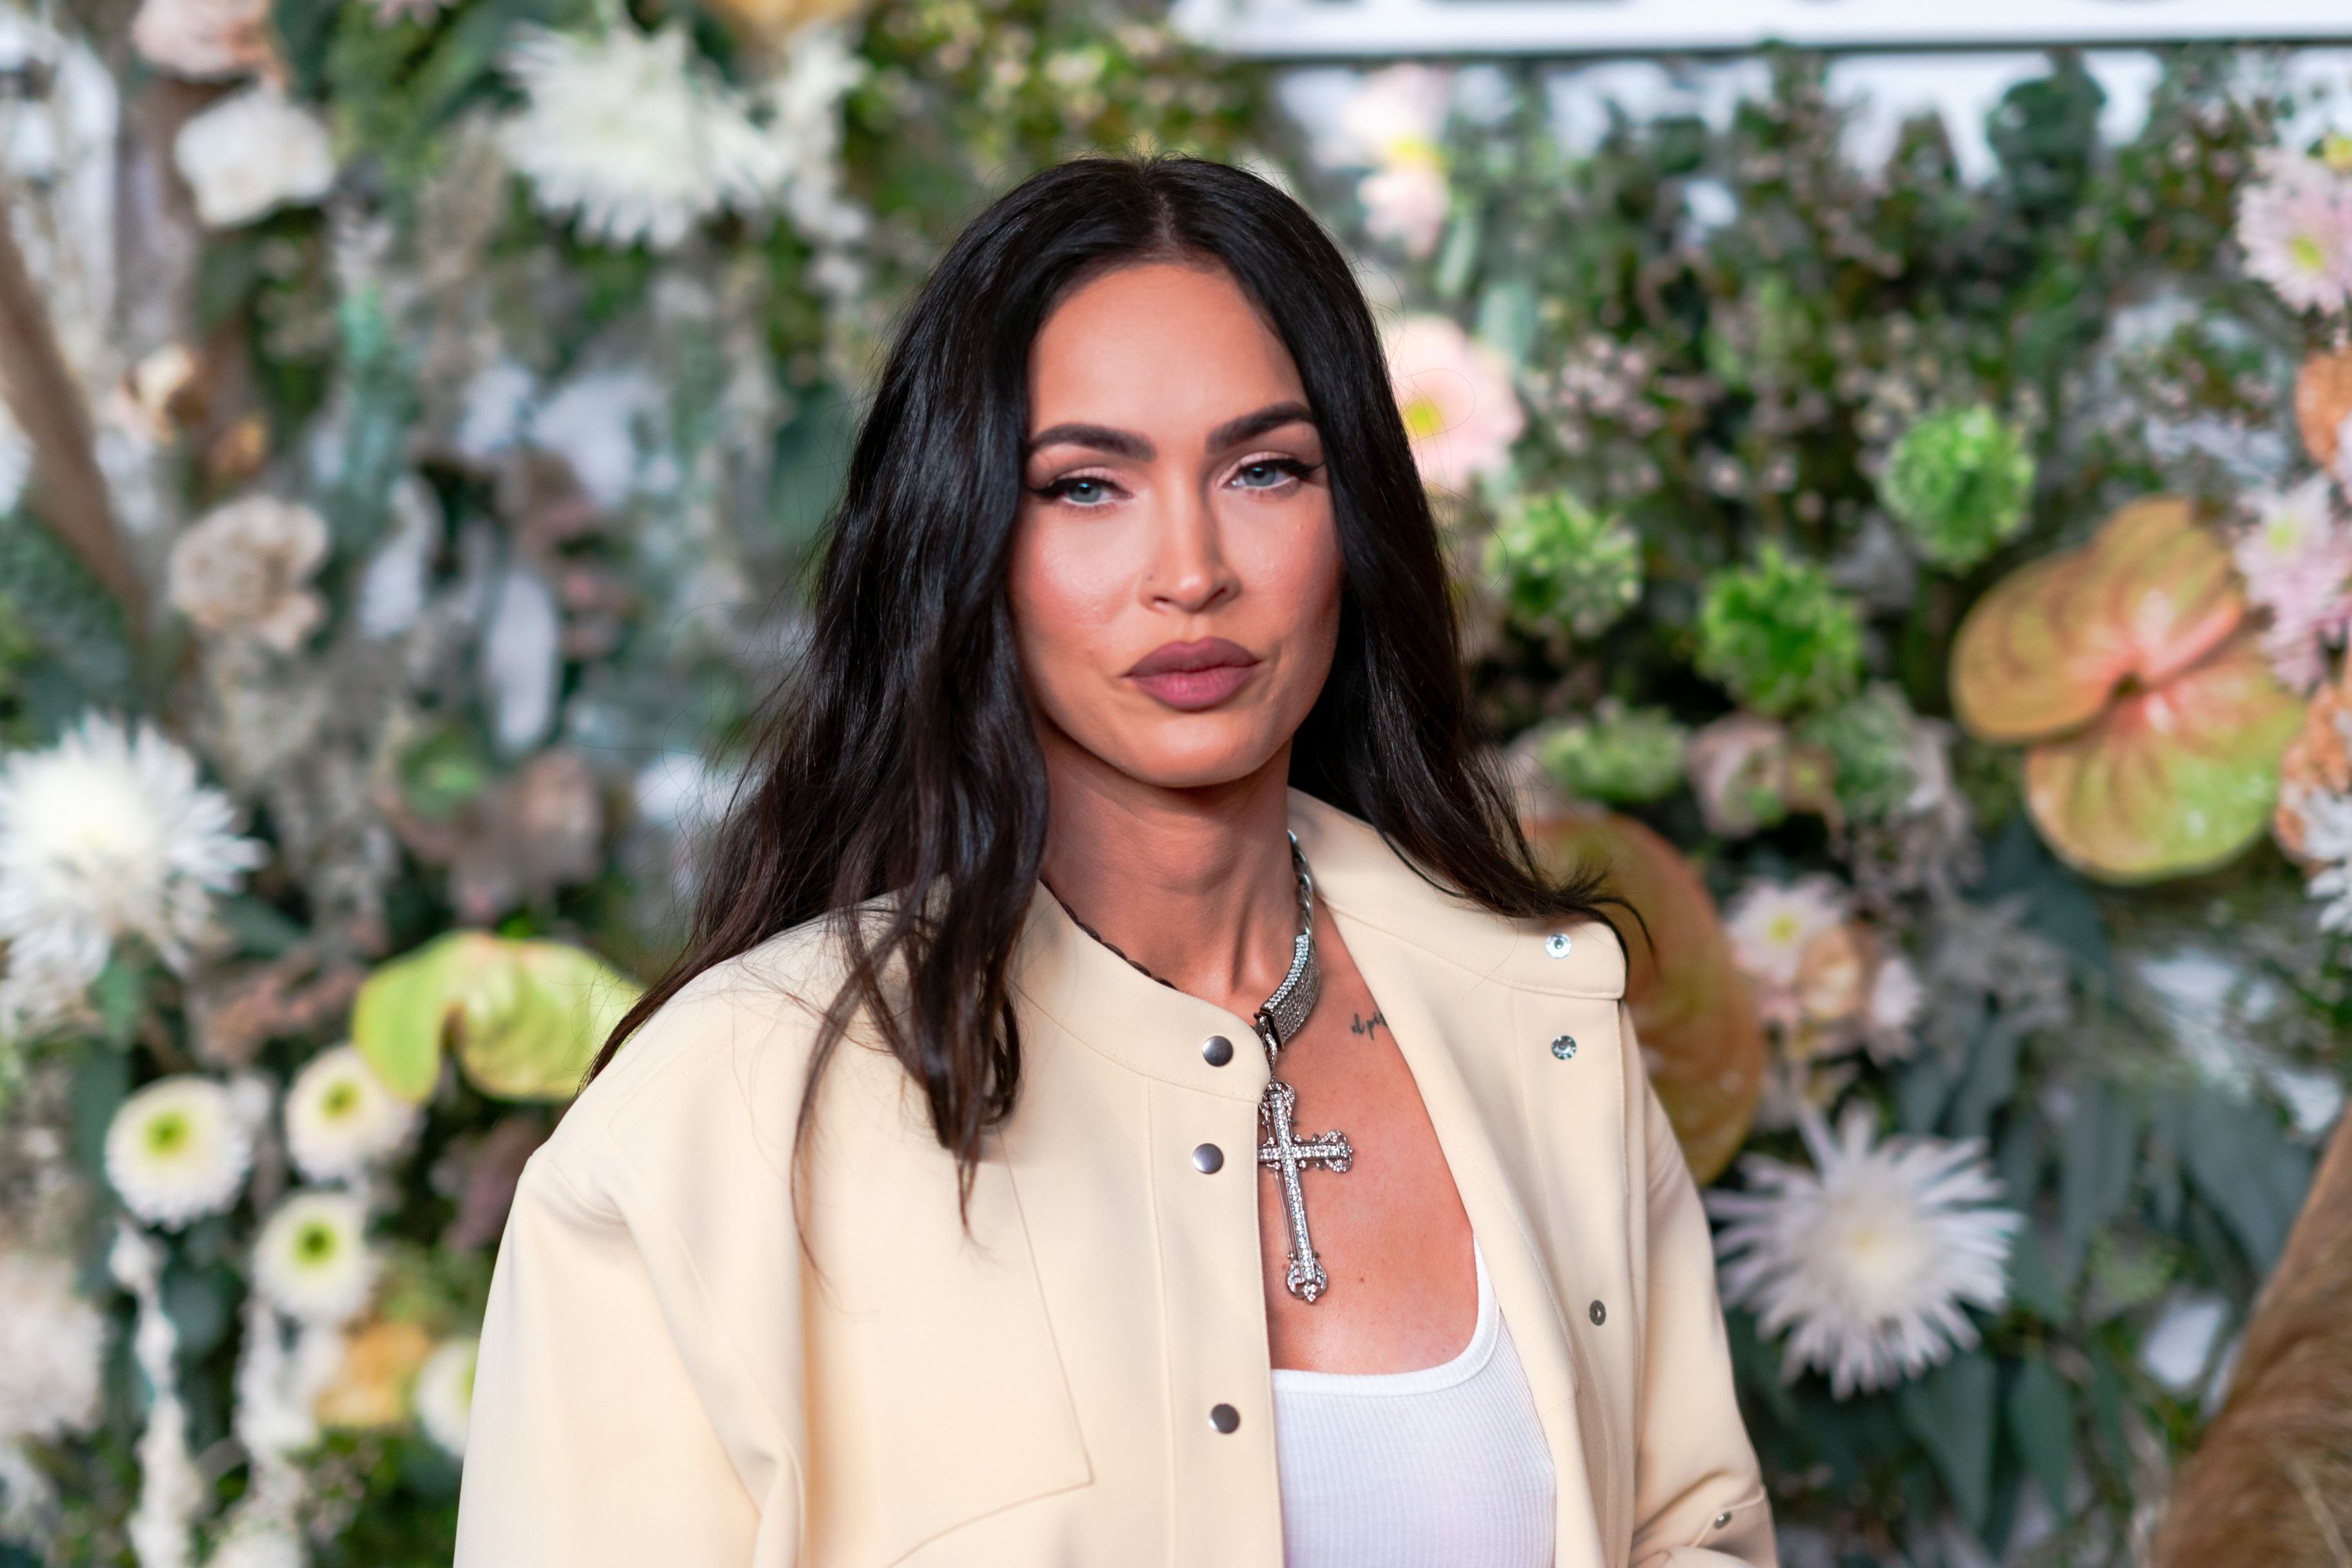 Megan Fox on September 09, 2021, in New York City. | Source: Getty Images